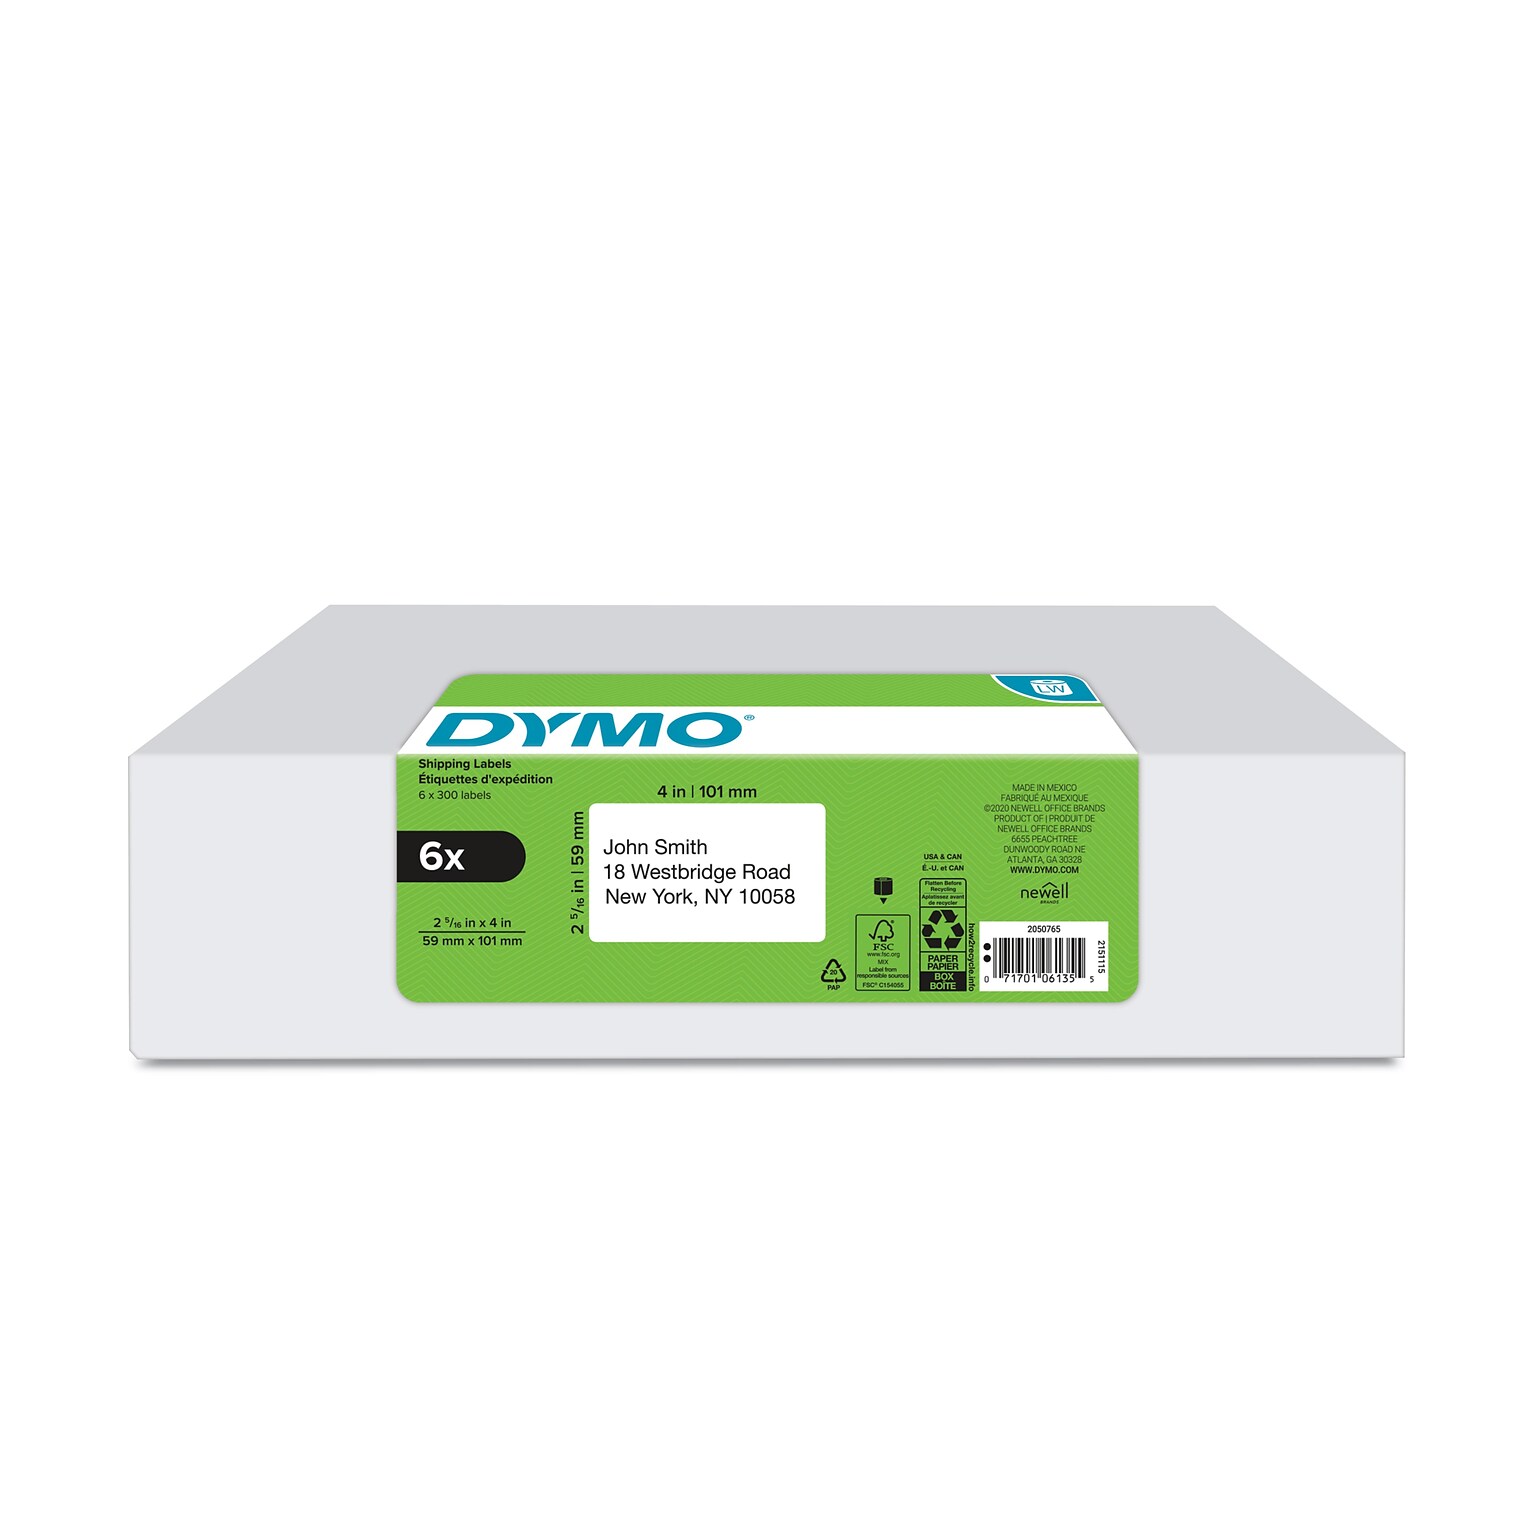 DYMO LabelWriter 2050765 Shipping Labels, 4 x 2-5/16, Black on White, 300 Labels/Roll, 6 Rolls/Box (2050765)